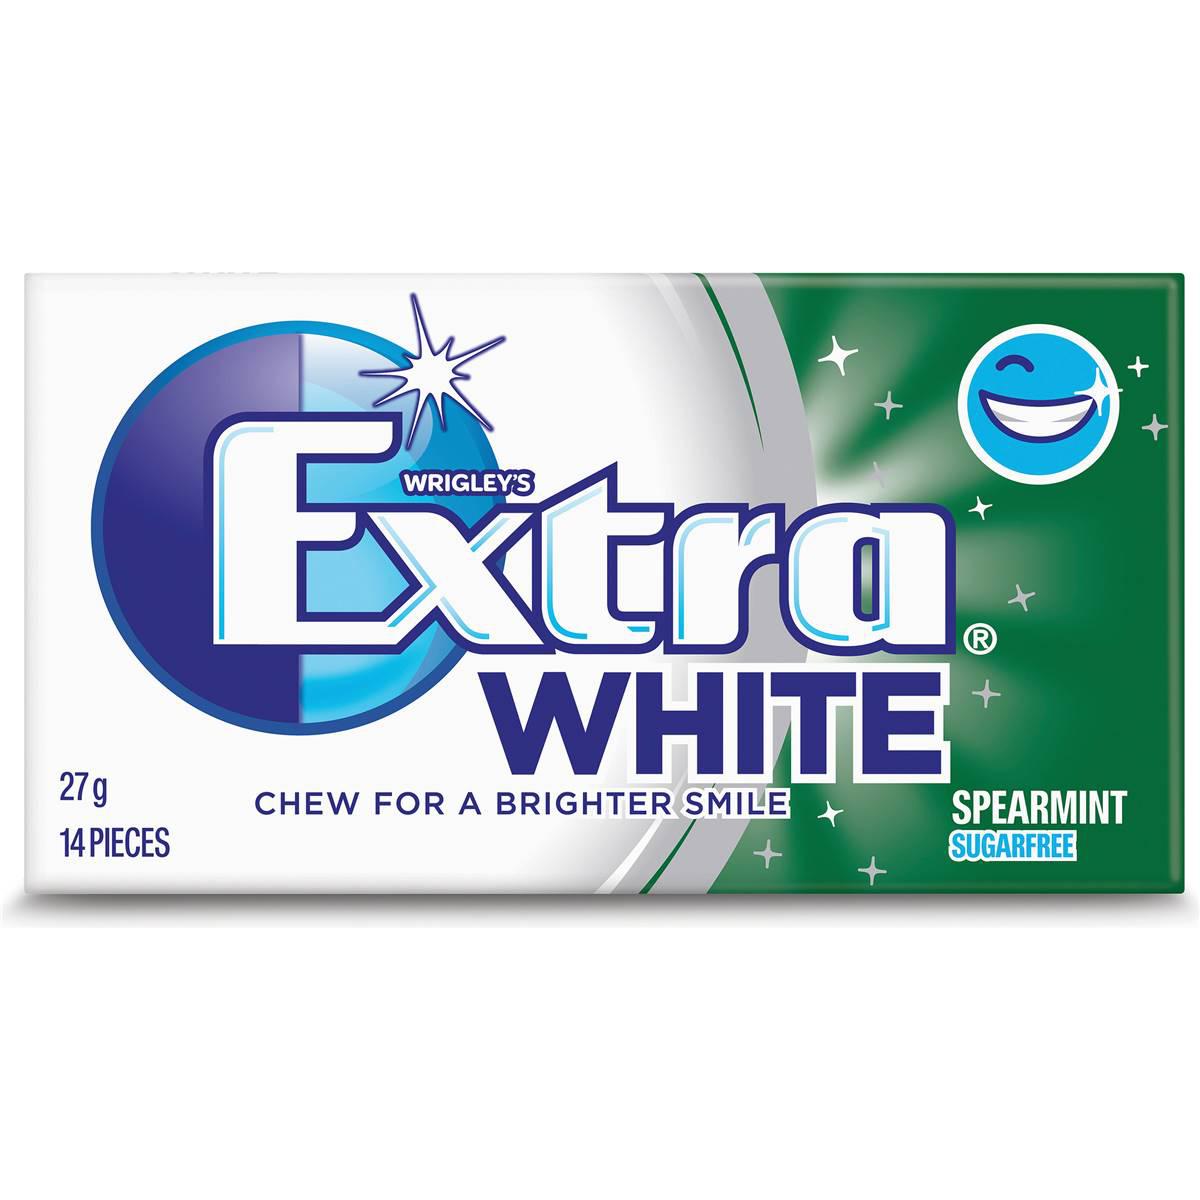 Extra White Spearmint Sugar Free Chewing Gum 14pc 27g